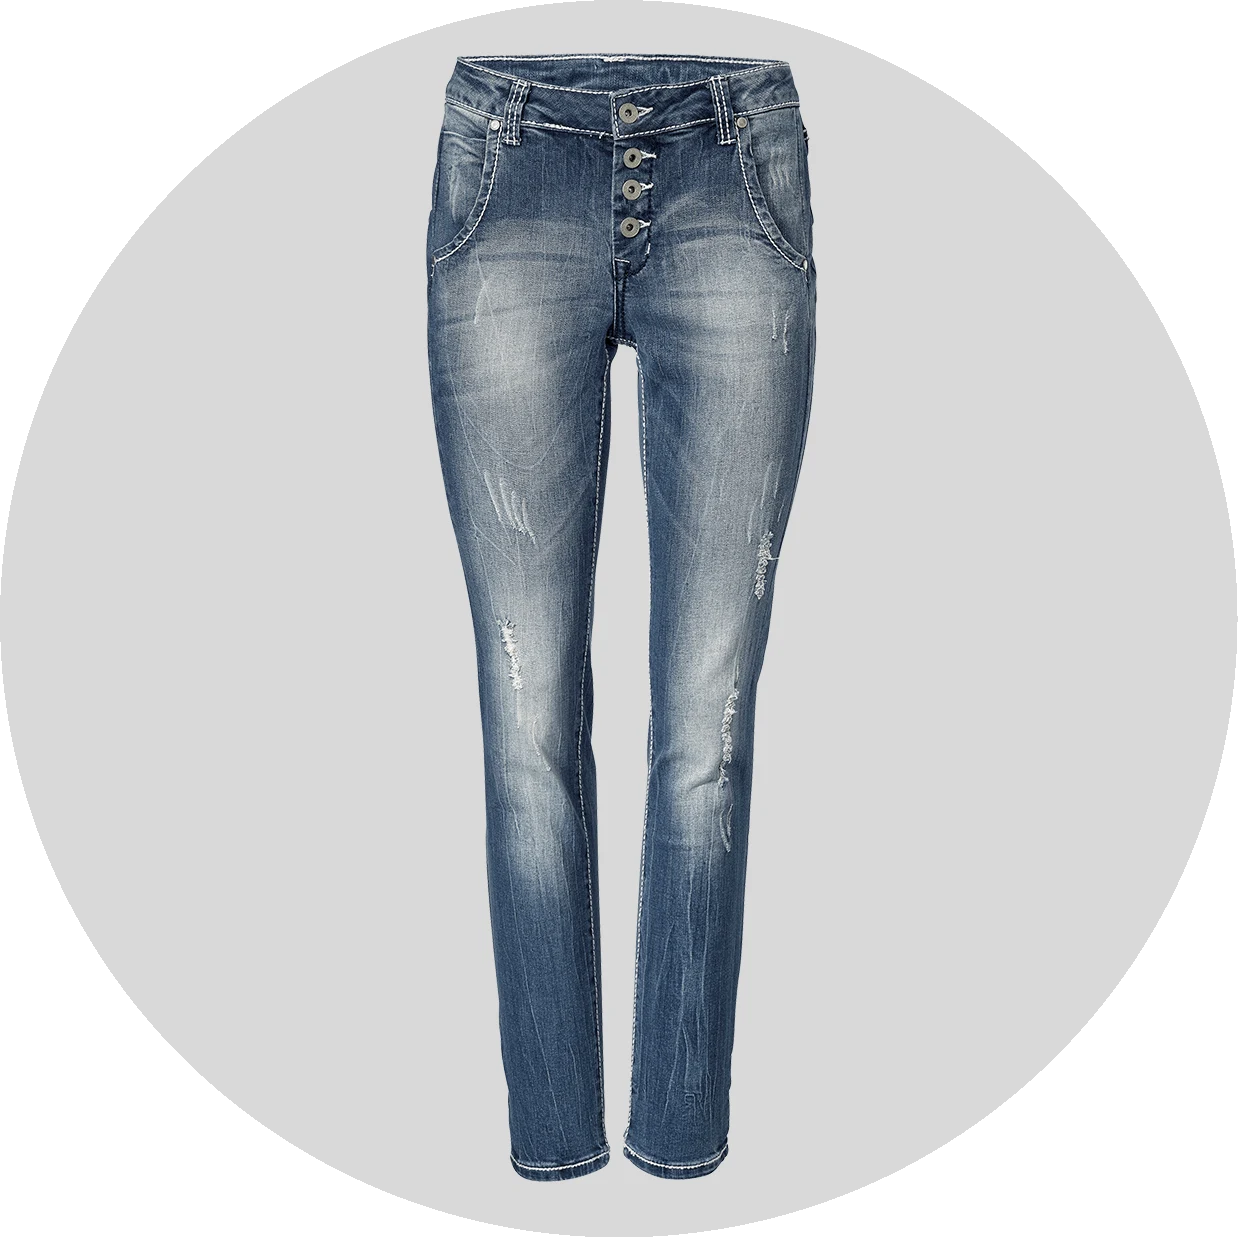 kw44 Visual Category Jeans 1 1